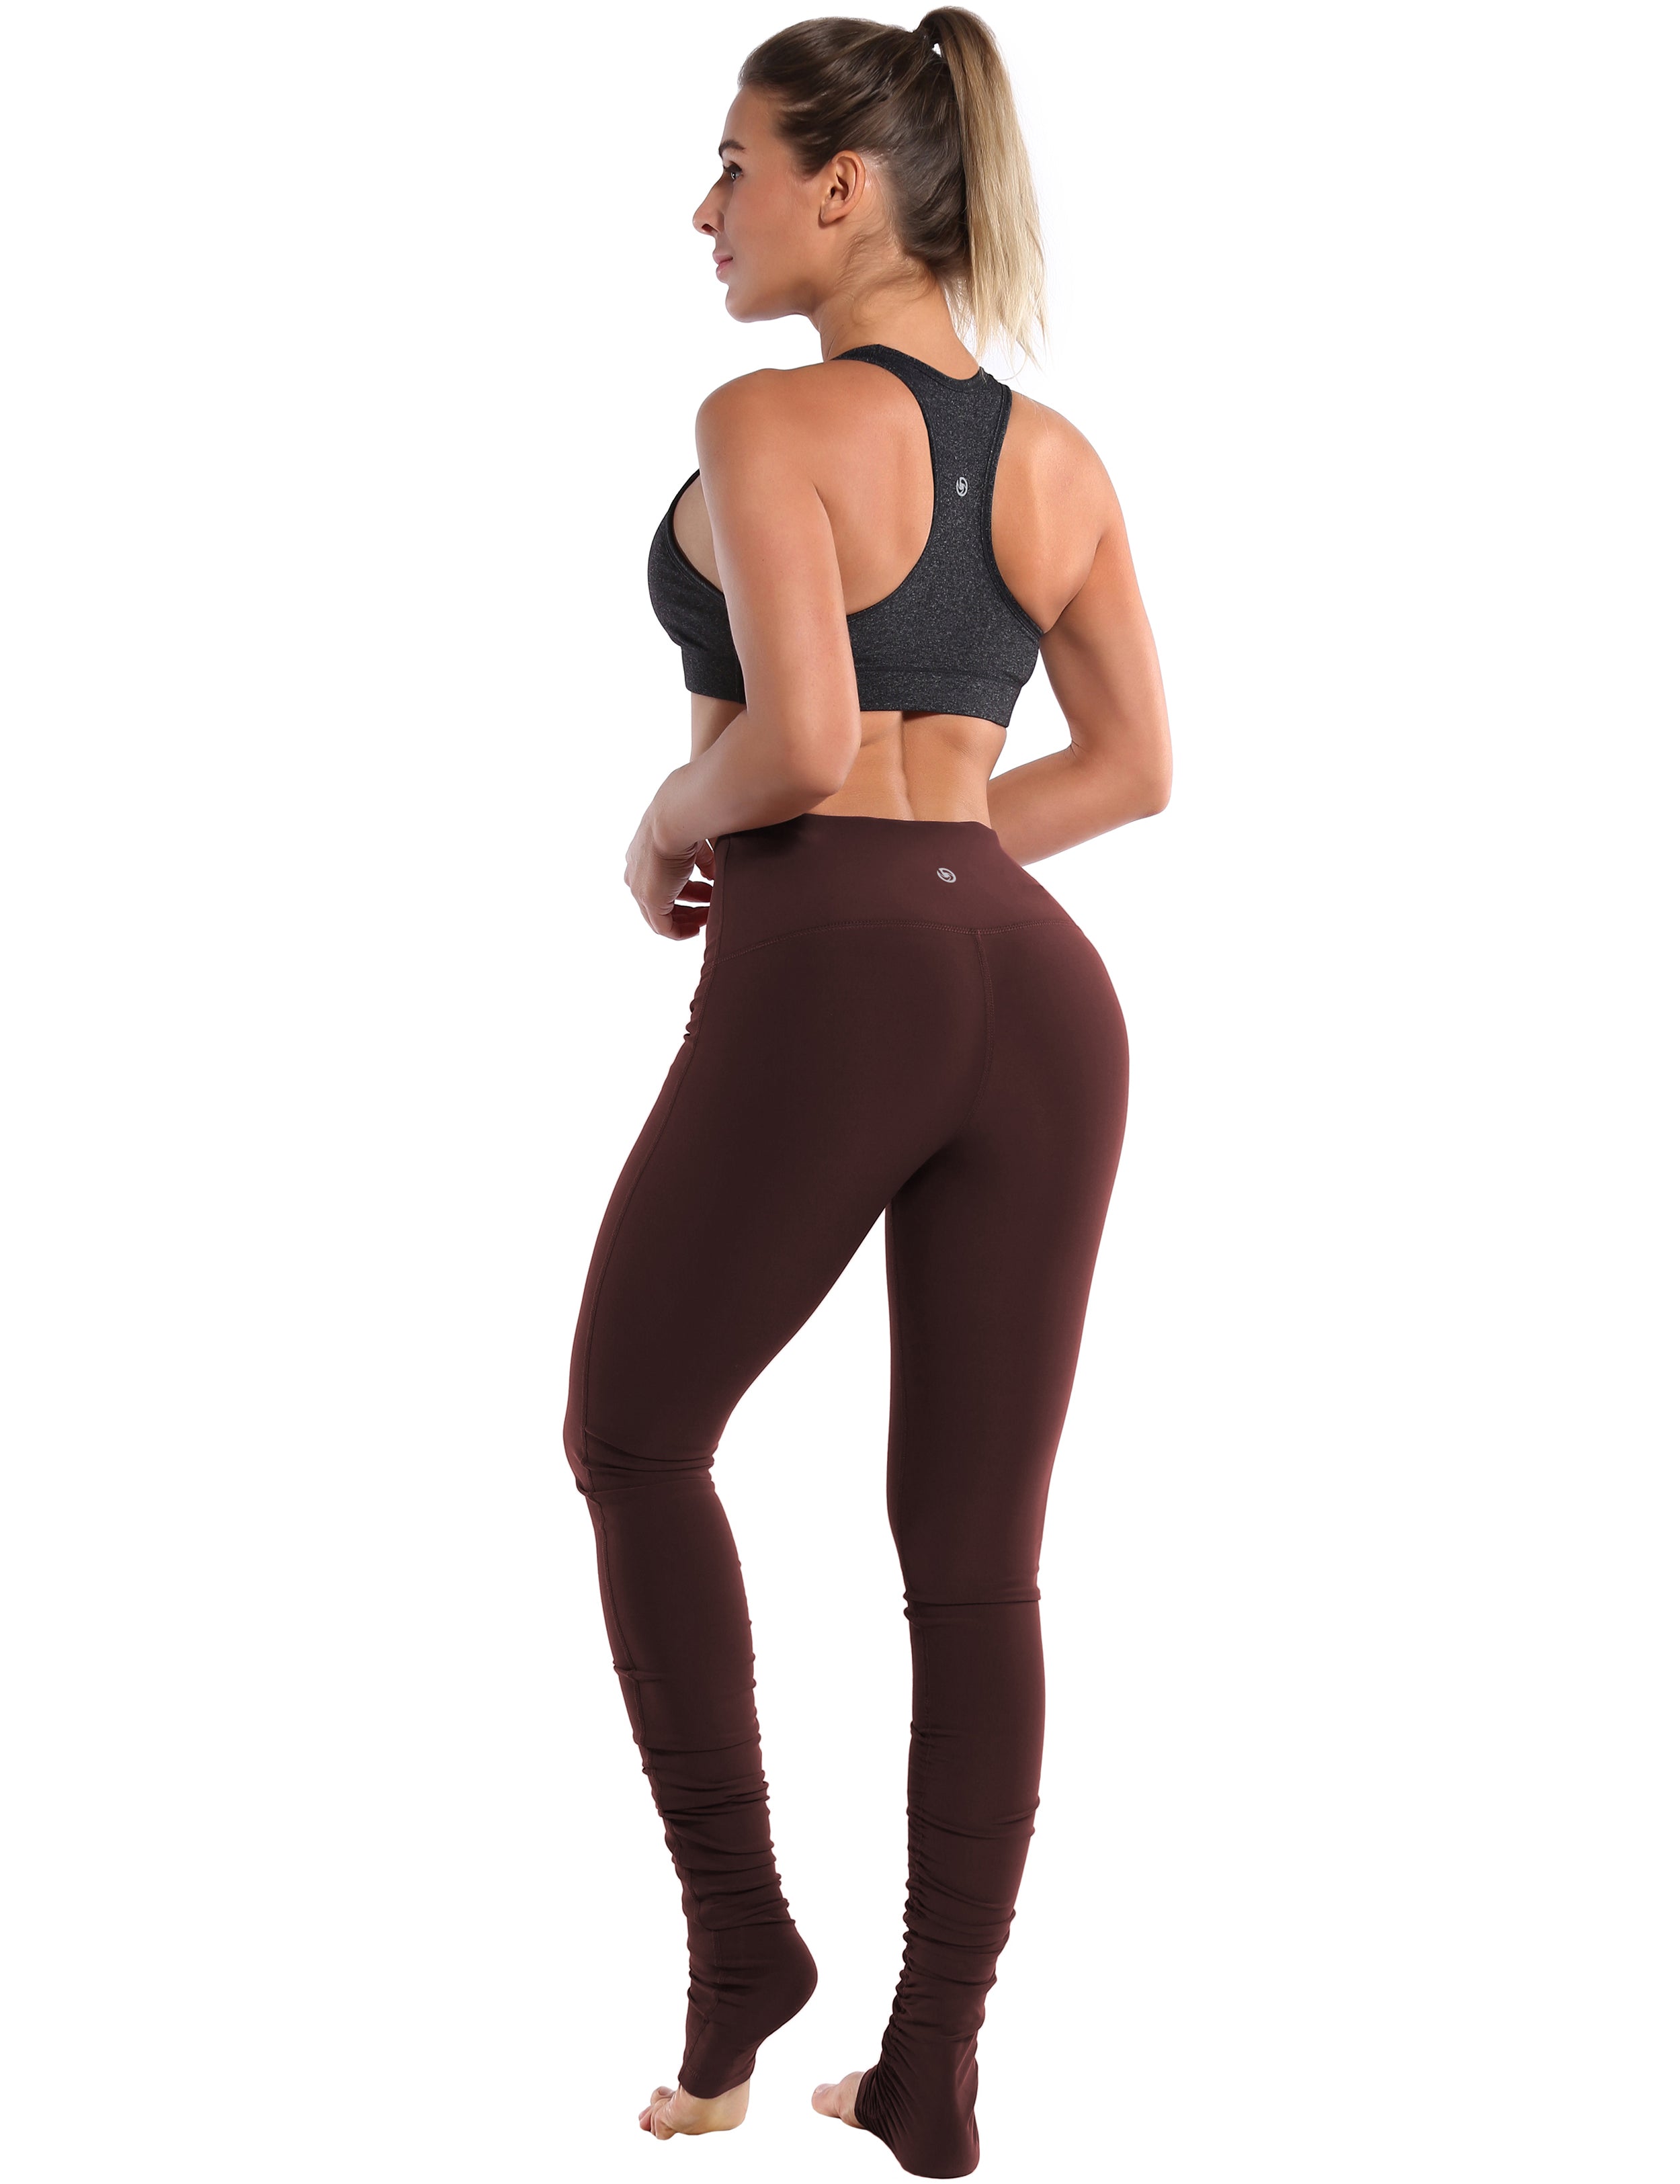 Over the Heel Pilates Pants mahoganymaroon Over the Heel Design 87%Nylon/13%Spandex Fabric doesn't attract lint easily 4-way stretch No see-through Moisture-wicking Tummy control